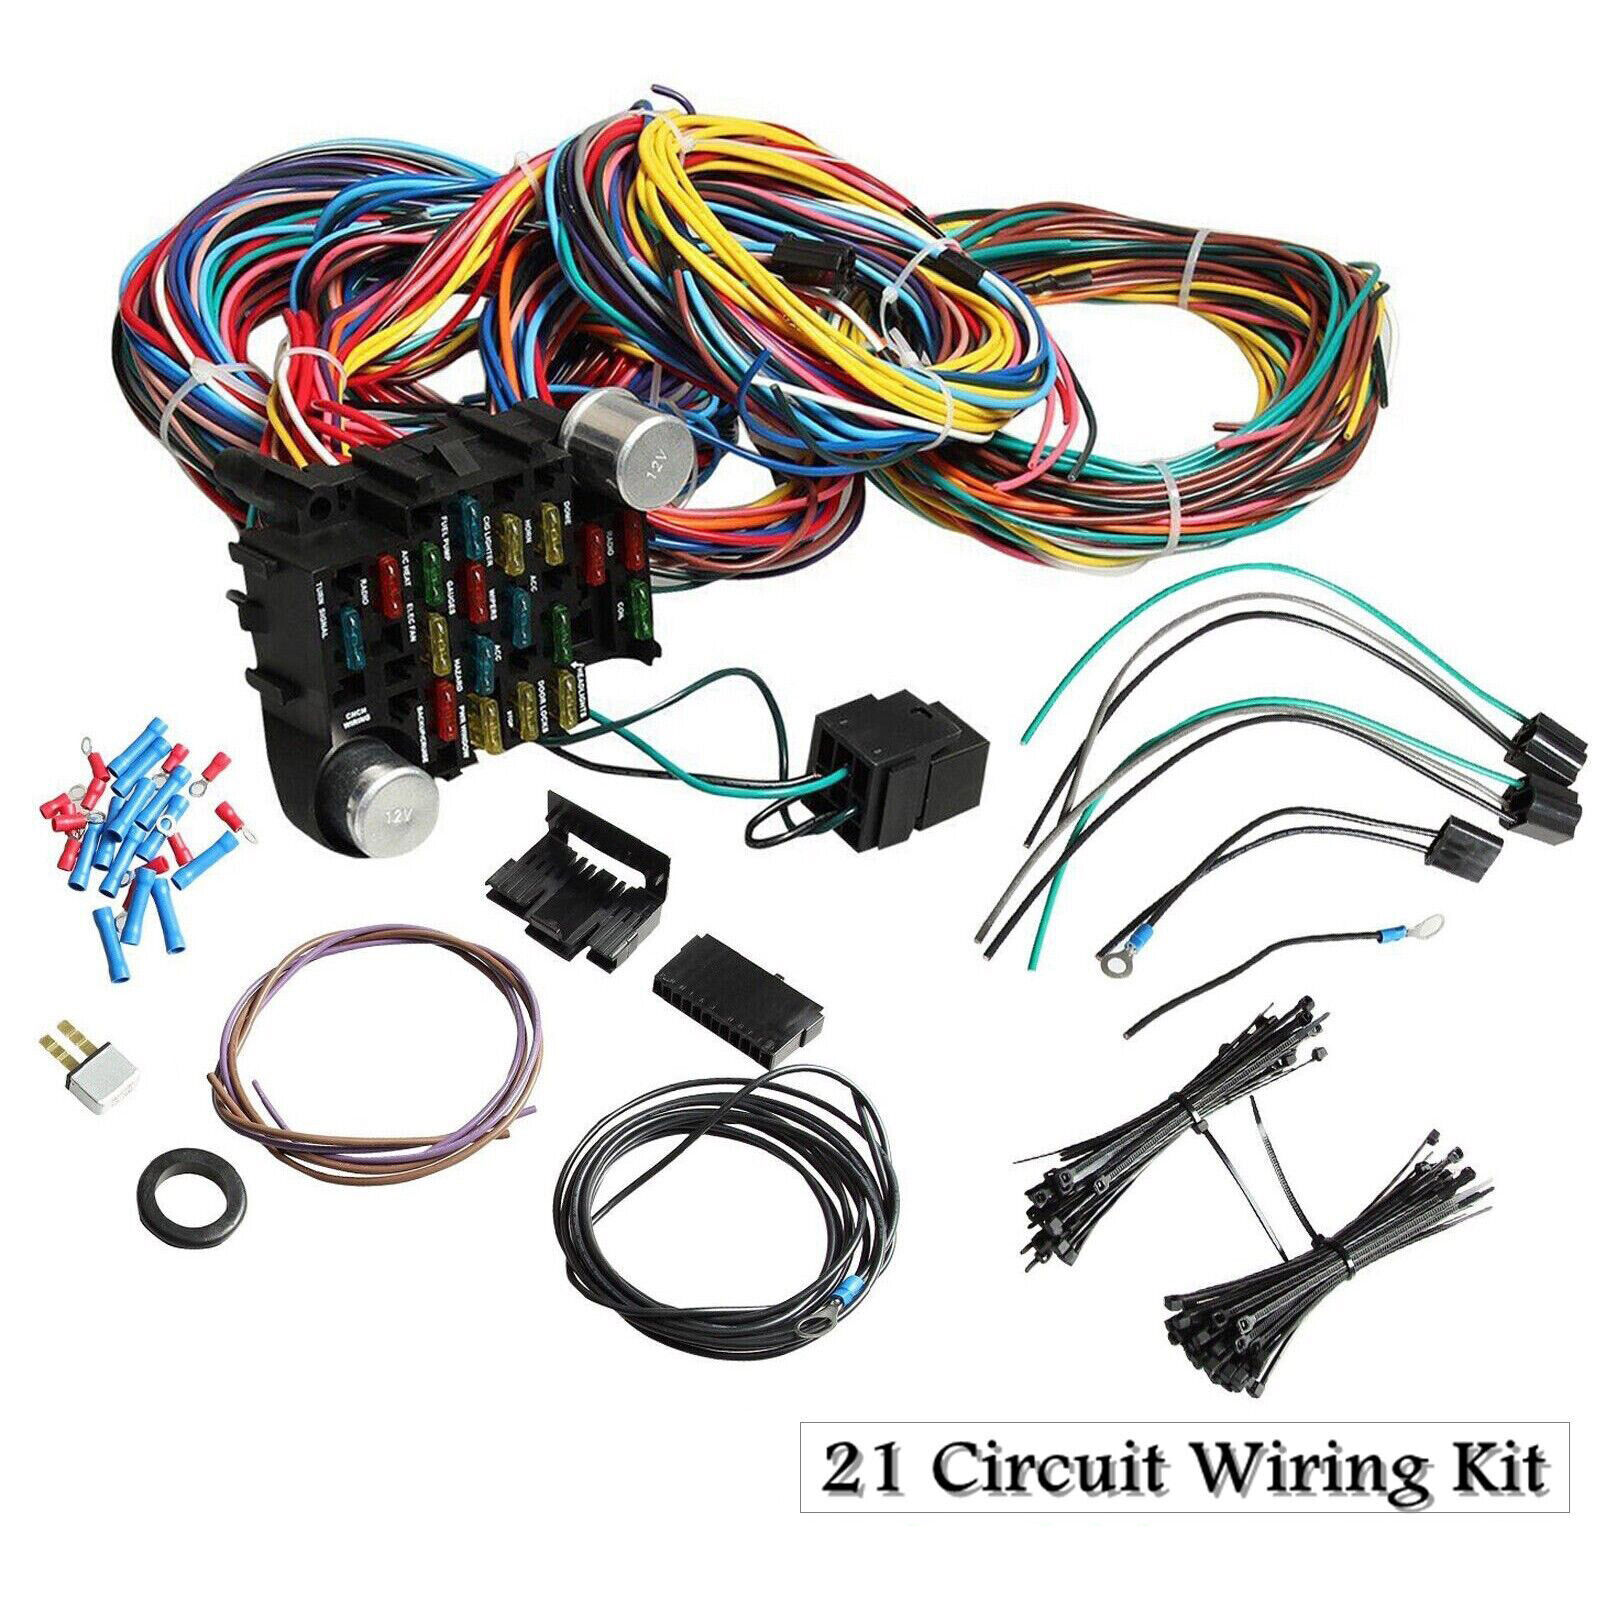 Universal Extra long Wires 21 Circuit Wiring Harness Hotrod For Chevy Mopar Ford